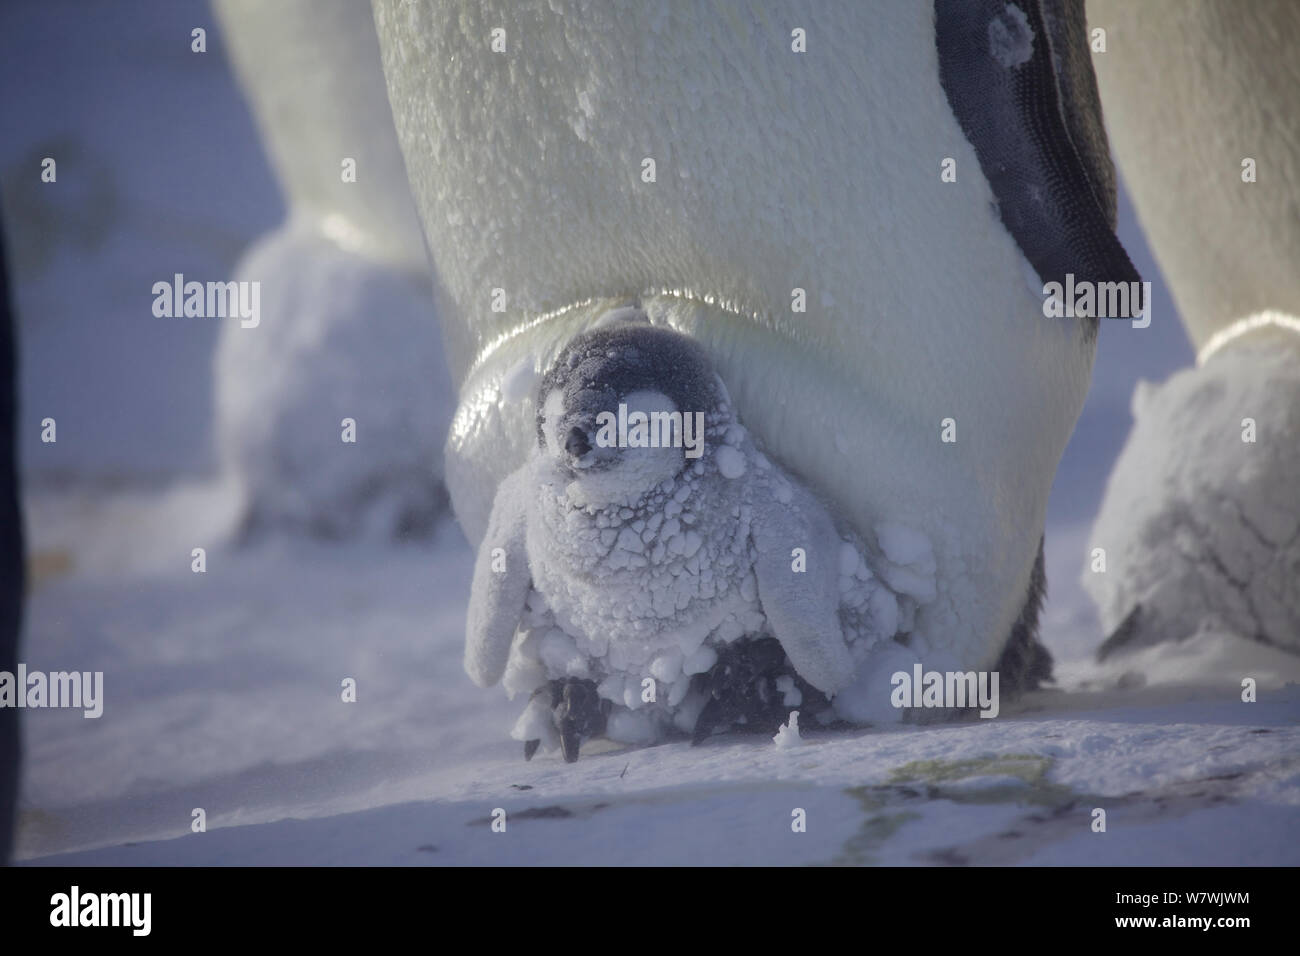 Emperor penguin (Aptenodytes forsteri) covered in clumps of snow sitting on parent&#39;s feet sheltering in brood pouch, Antarctica, September. Stock Photo